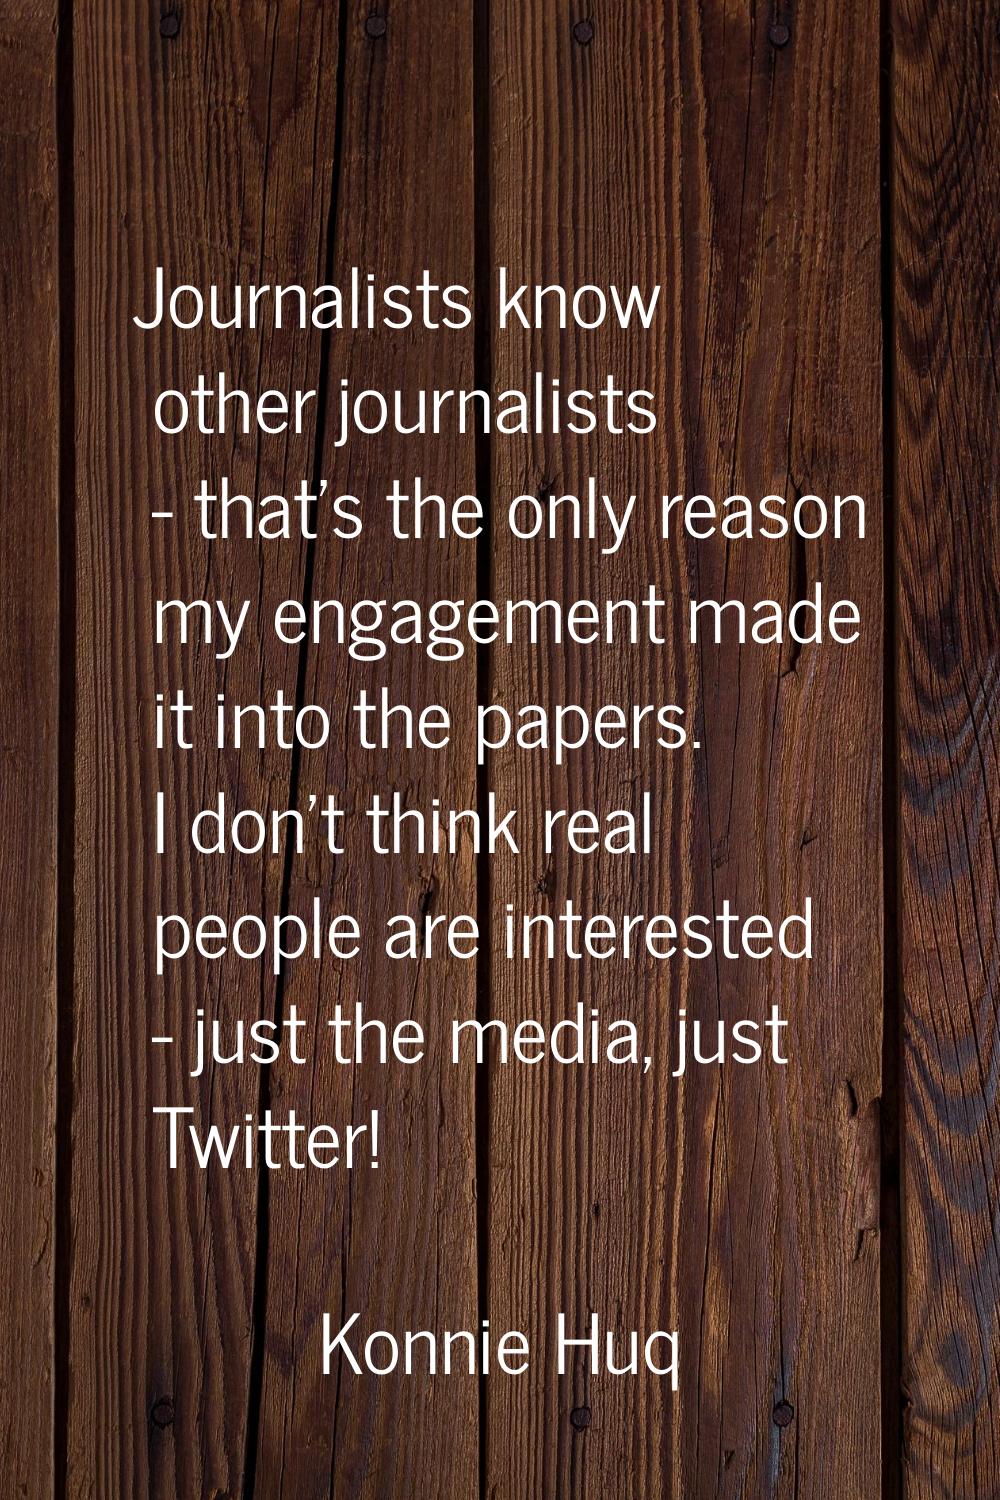 Journalists know other journalists - that's the only reason my engagement made it into the papers. 